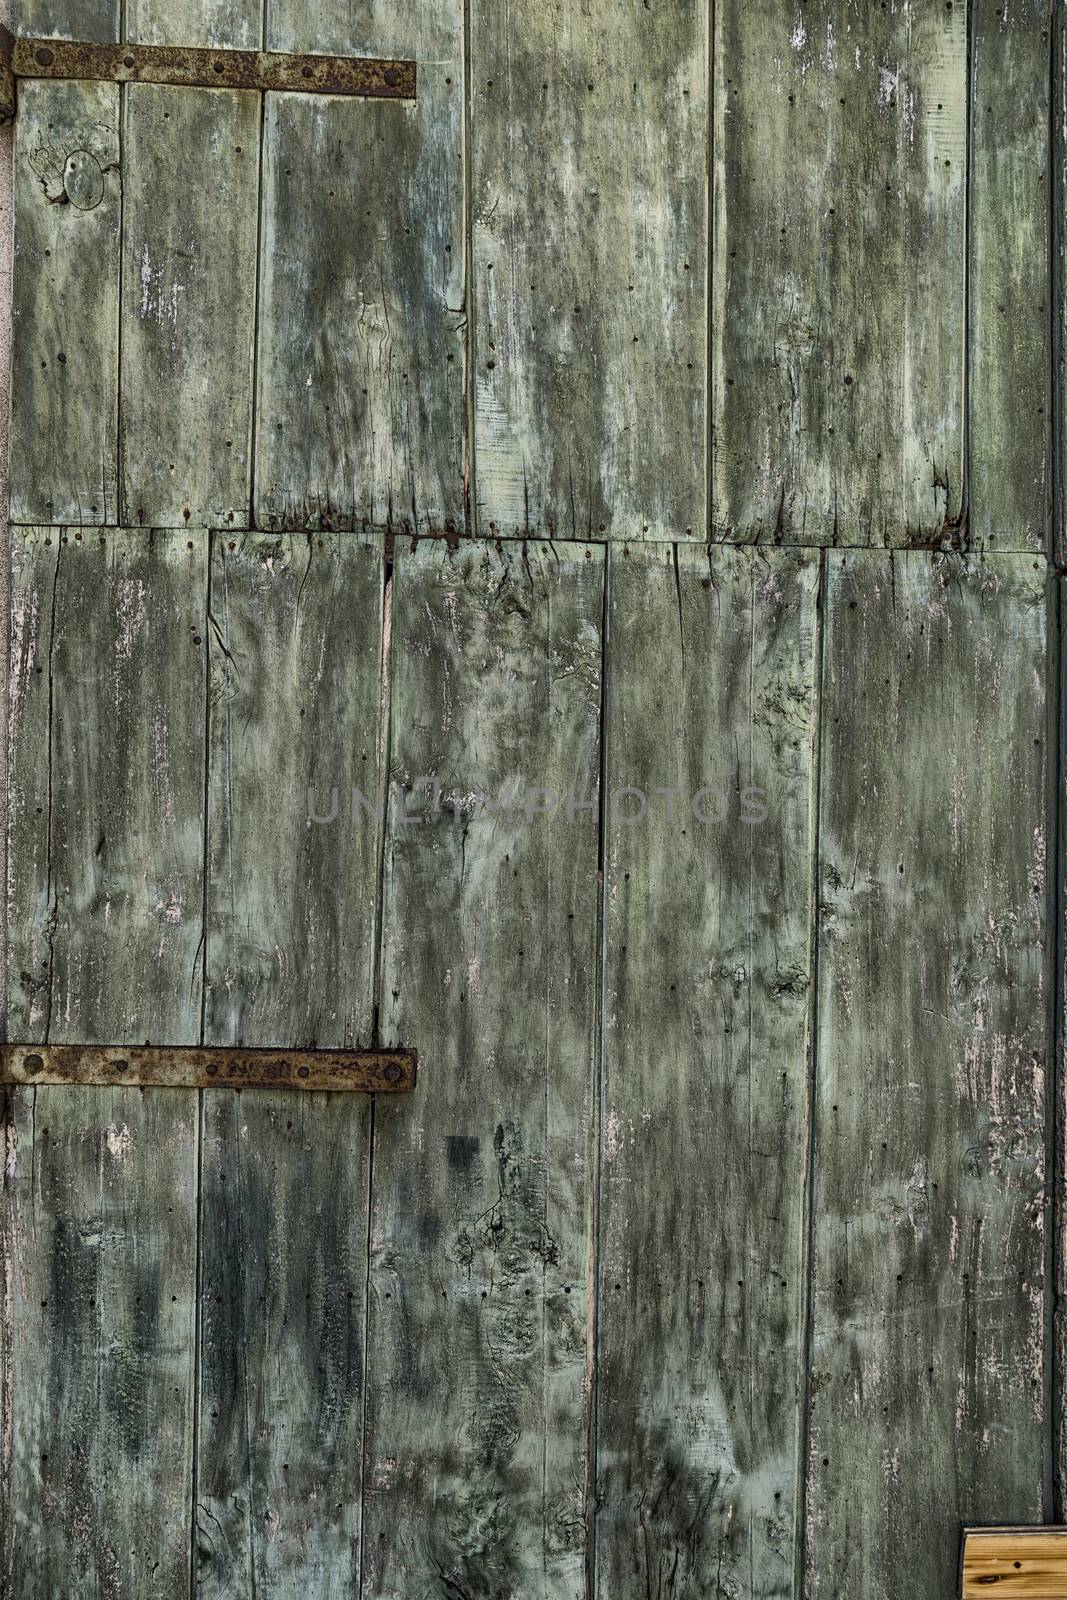 An old green painted wooden door with woodworm holes and rusty hinges